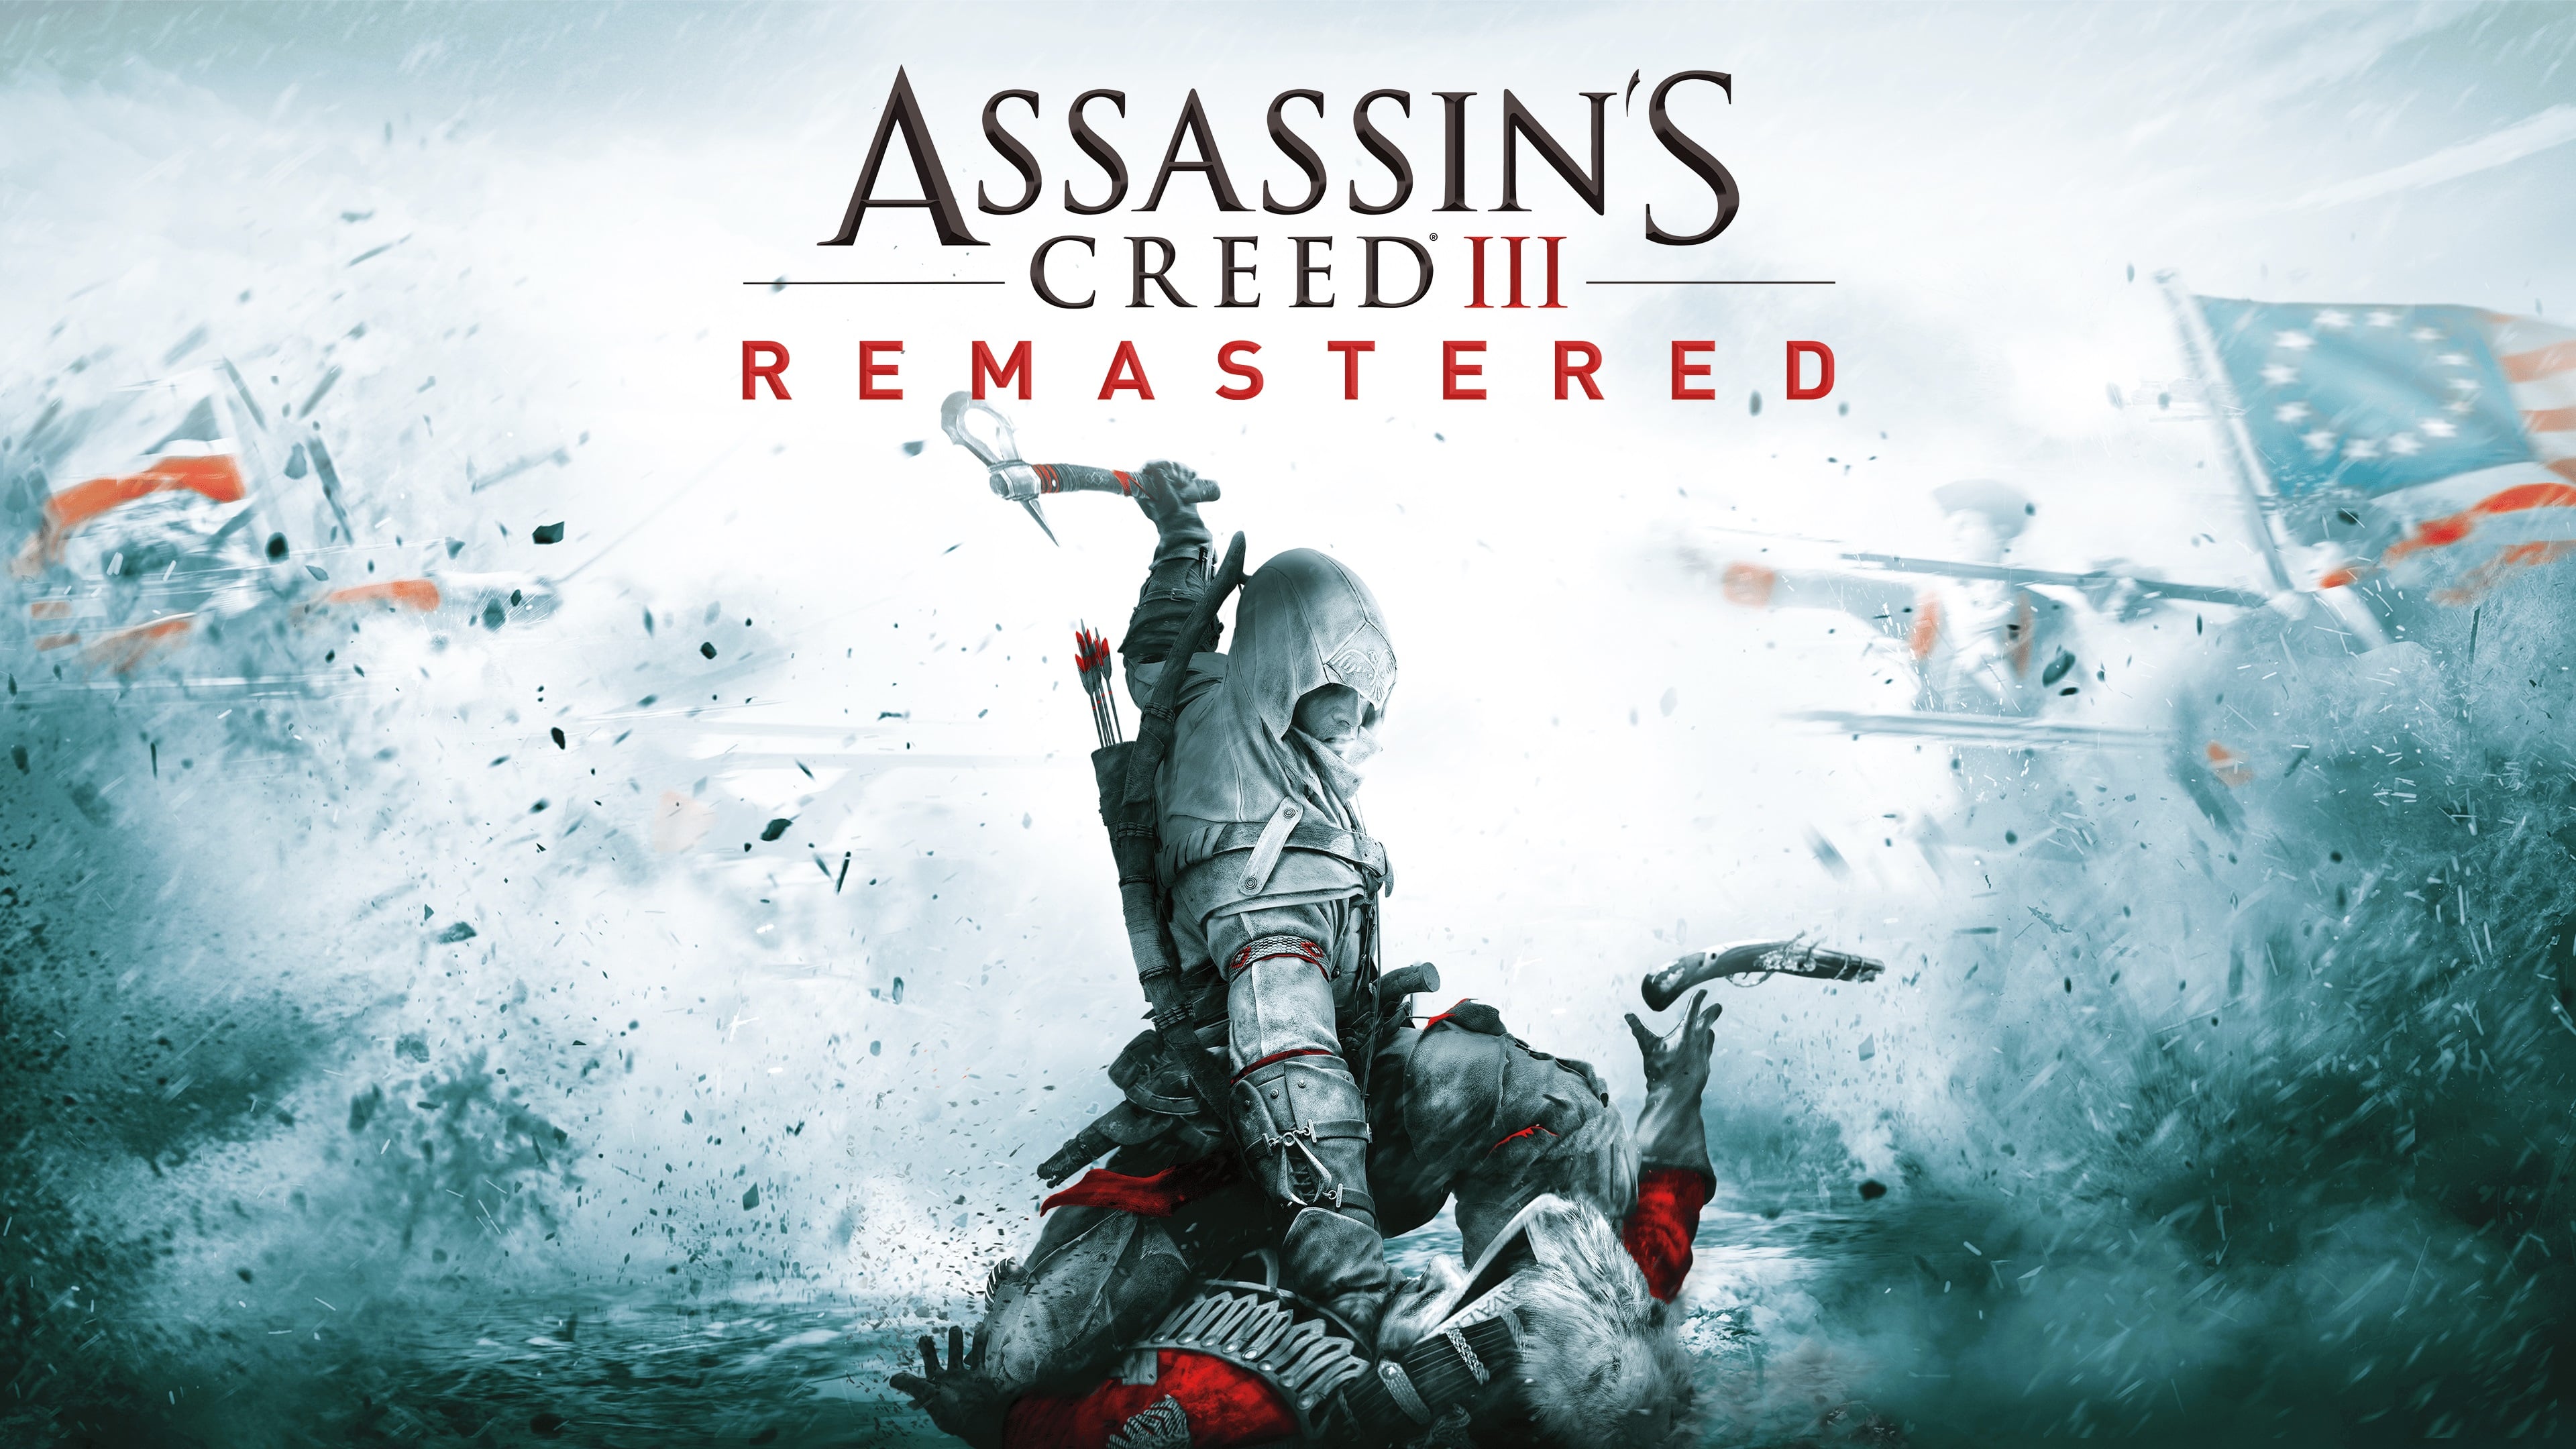 Assassin's Creed III Remastered Achievement List Revealed